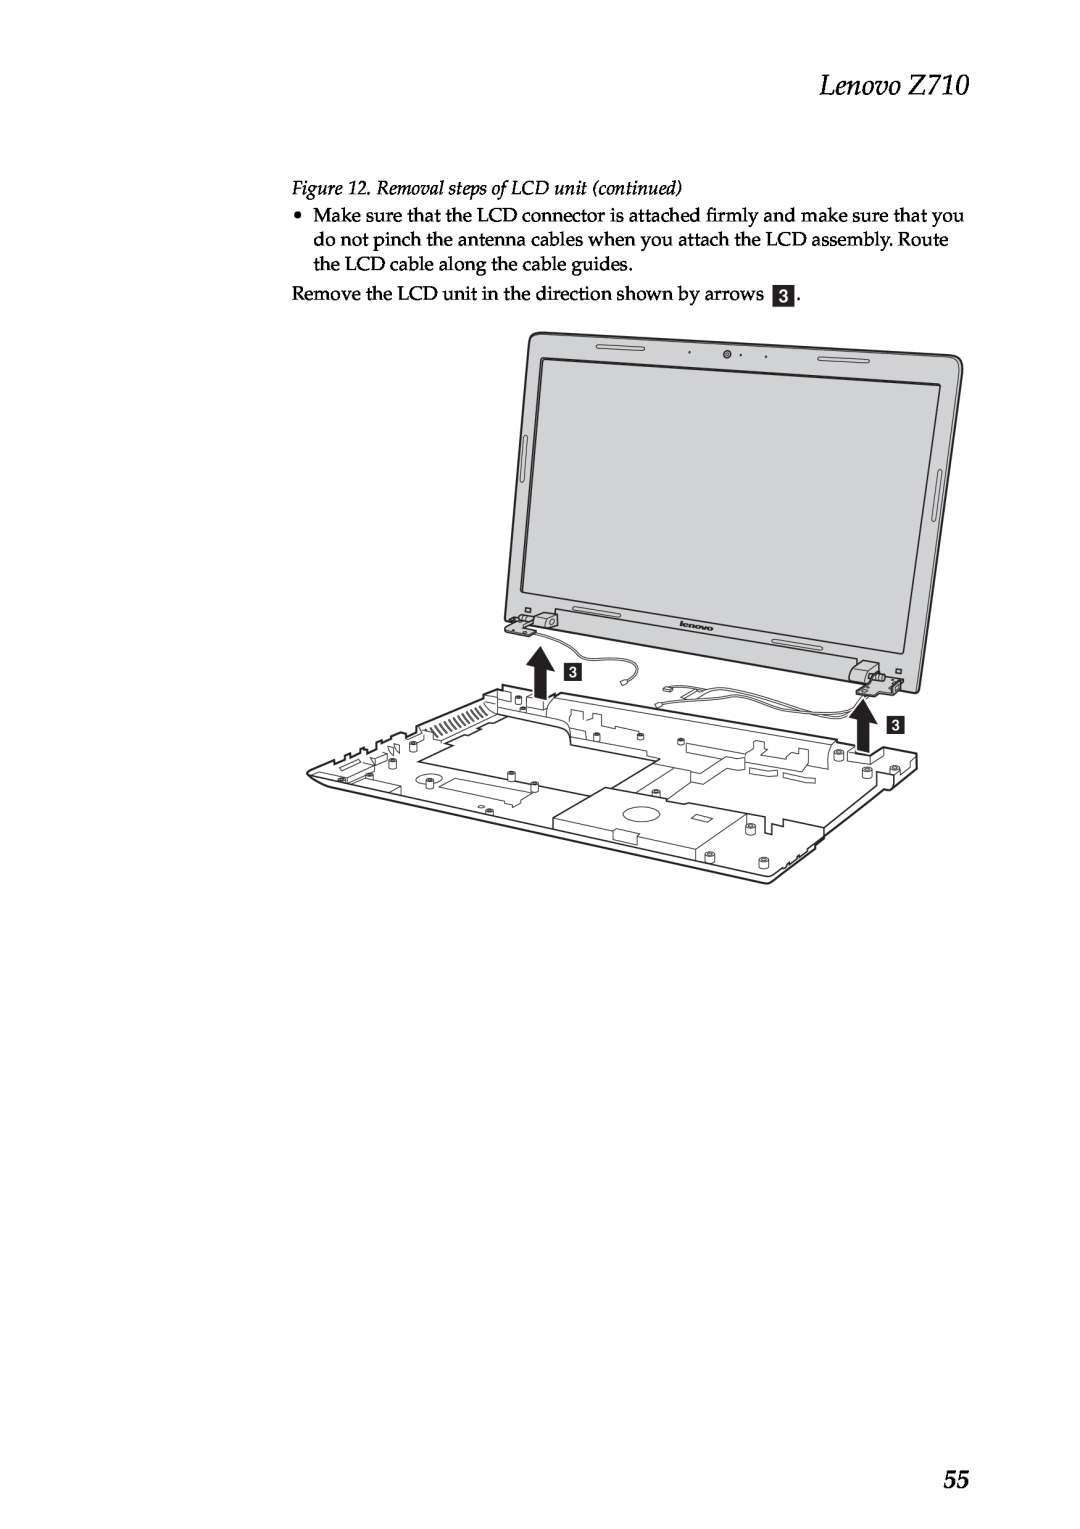 Lenovo manual Removal steps of LCD unit continued, Lenovo Z710, Remove the LCD unit in the direction shown by arrows c 